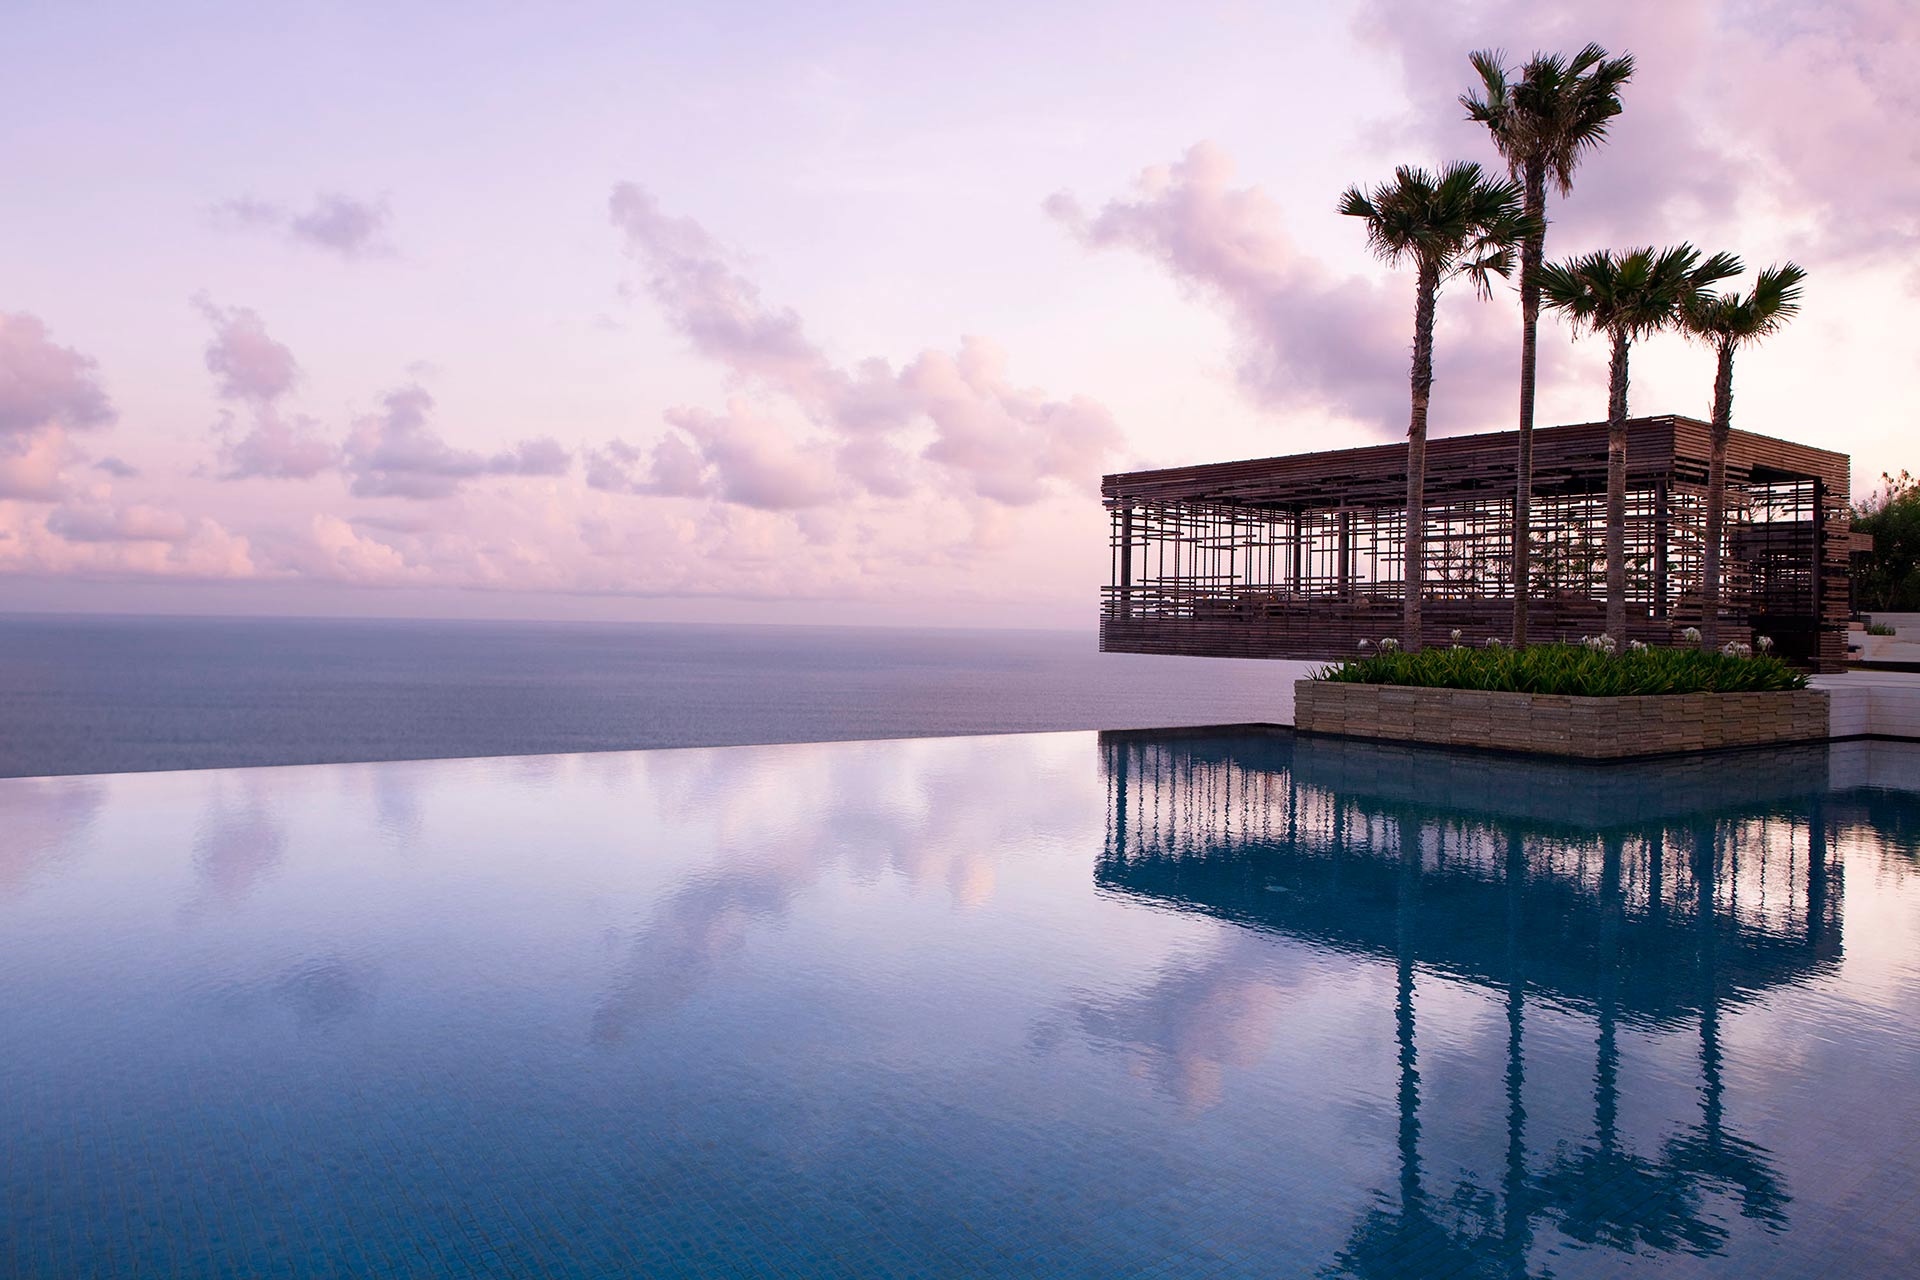 The Olympic-size infinity pool is a great spot to enjoy the sunset